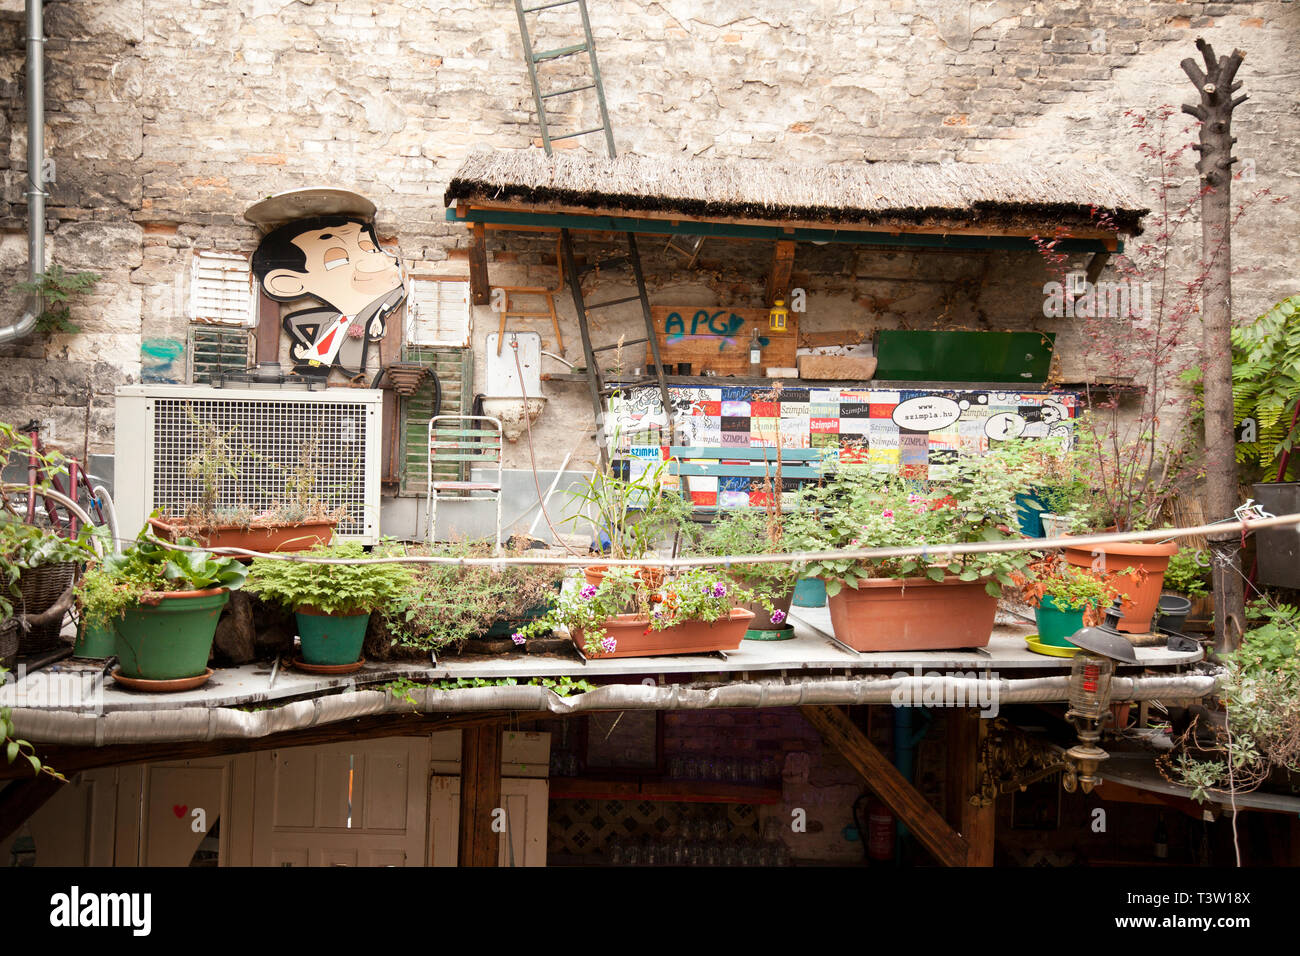 BUDAPEST, HUNGARY - SEPTEMBER 20, 2017: Szimpla Kert isa huge and eclectic pub with old mismatched items & a disused Trabant car, with music, food, ma Stock Photo